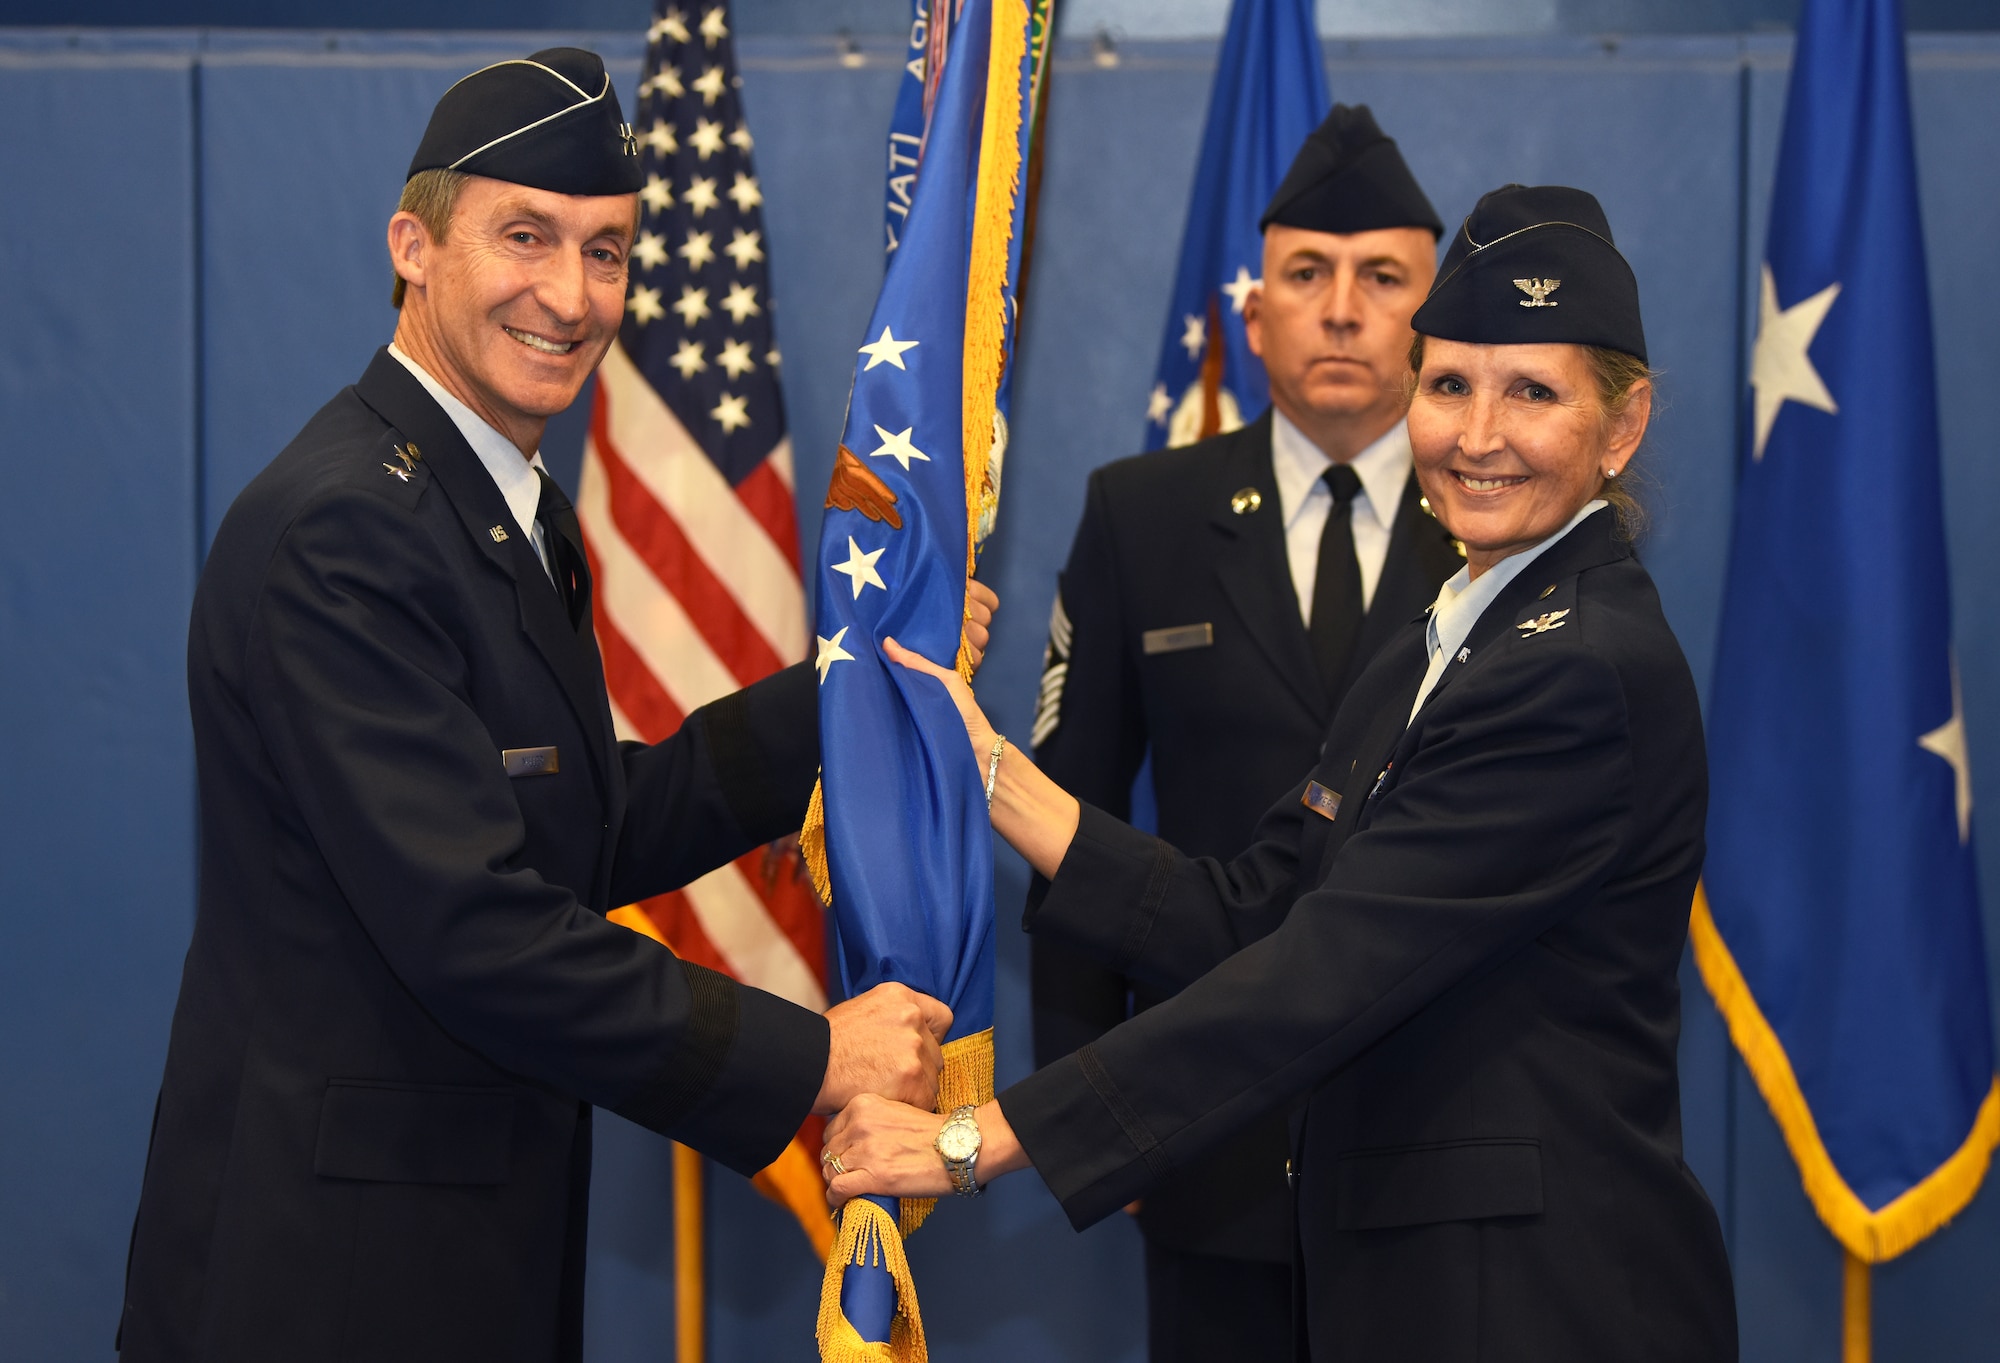 Maj. Gen. Ronald “Bruce” Miller, 10th Air Force commander, receives the 310th Space Wing guidon from Col. Traci L. Kueker-Murphy, outgoing 310th SW commander, during a change of command ceremony, Nov. 3rd, 2018.